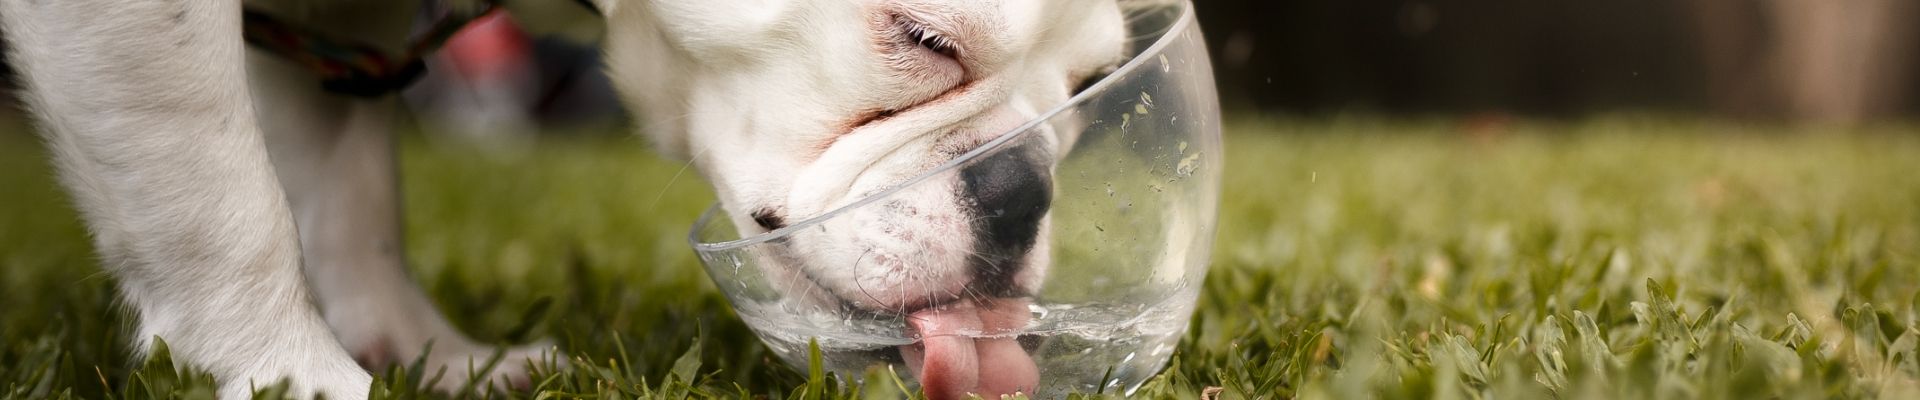 A bulldog drinking water out of a clear bowl